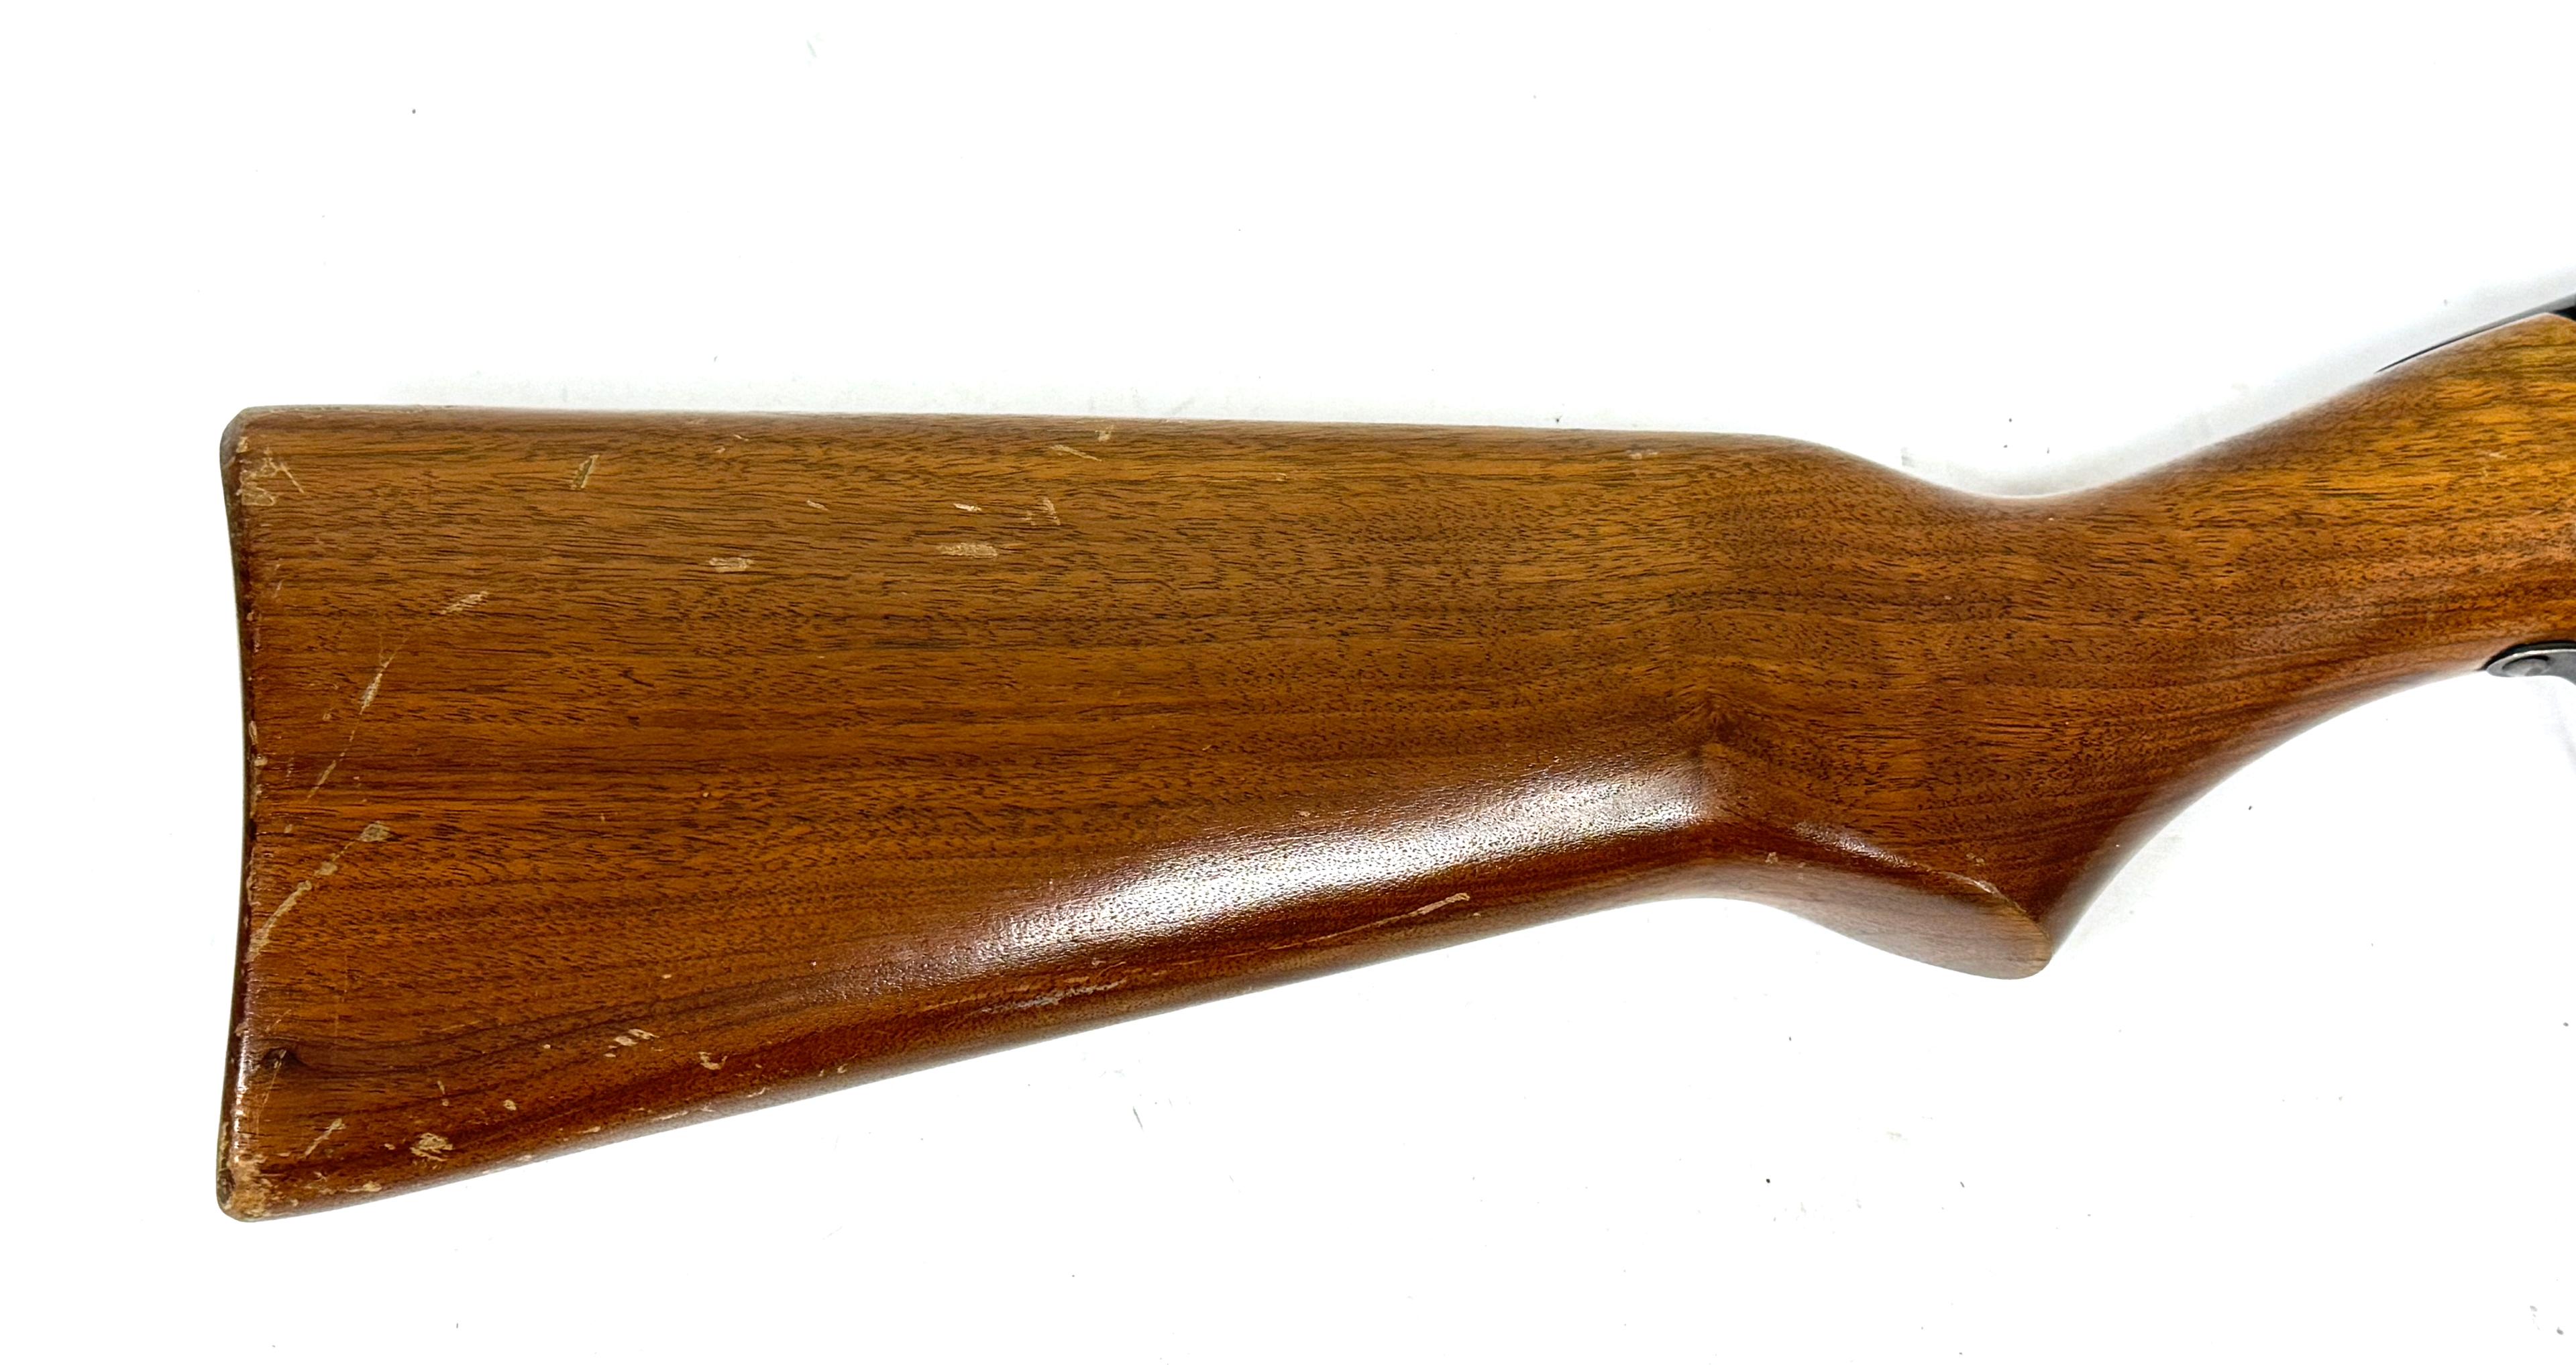 Sheridan Products C Series 5mm Pump Action Pellet Rifle